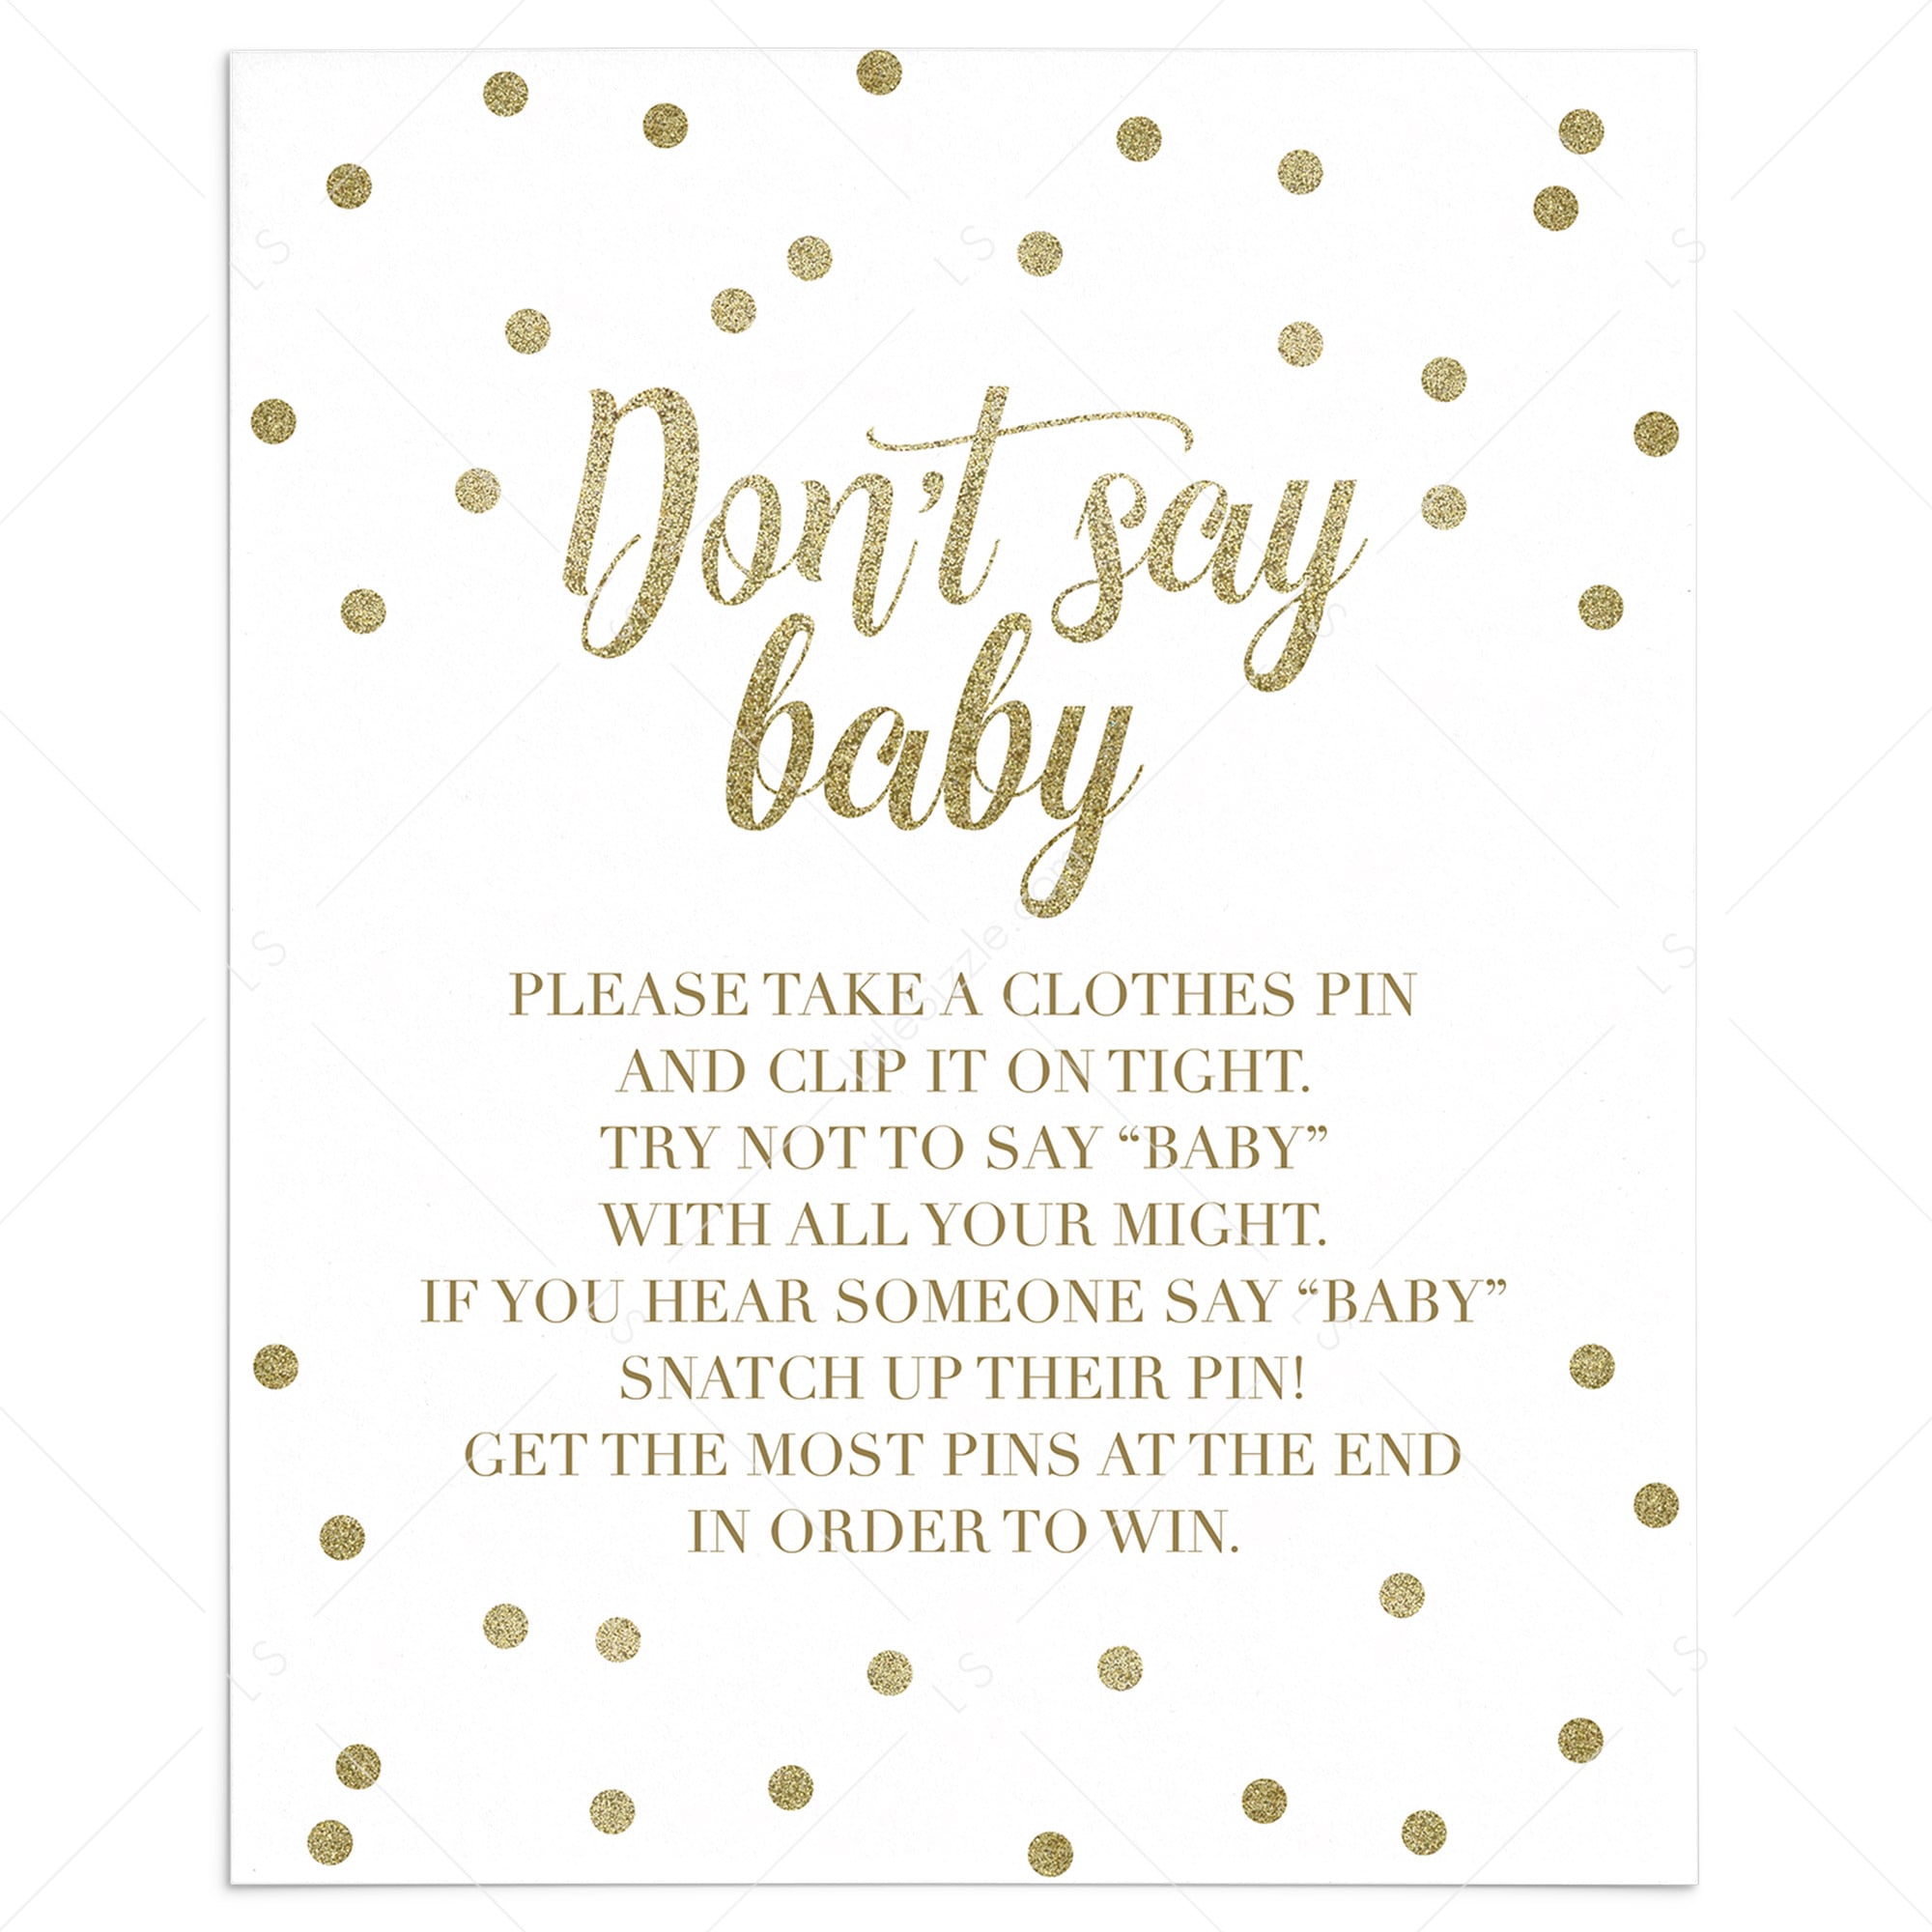 Pin on Baby Gear